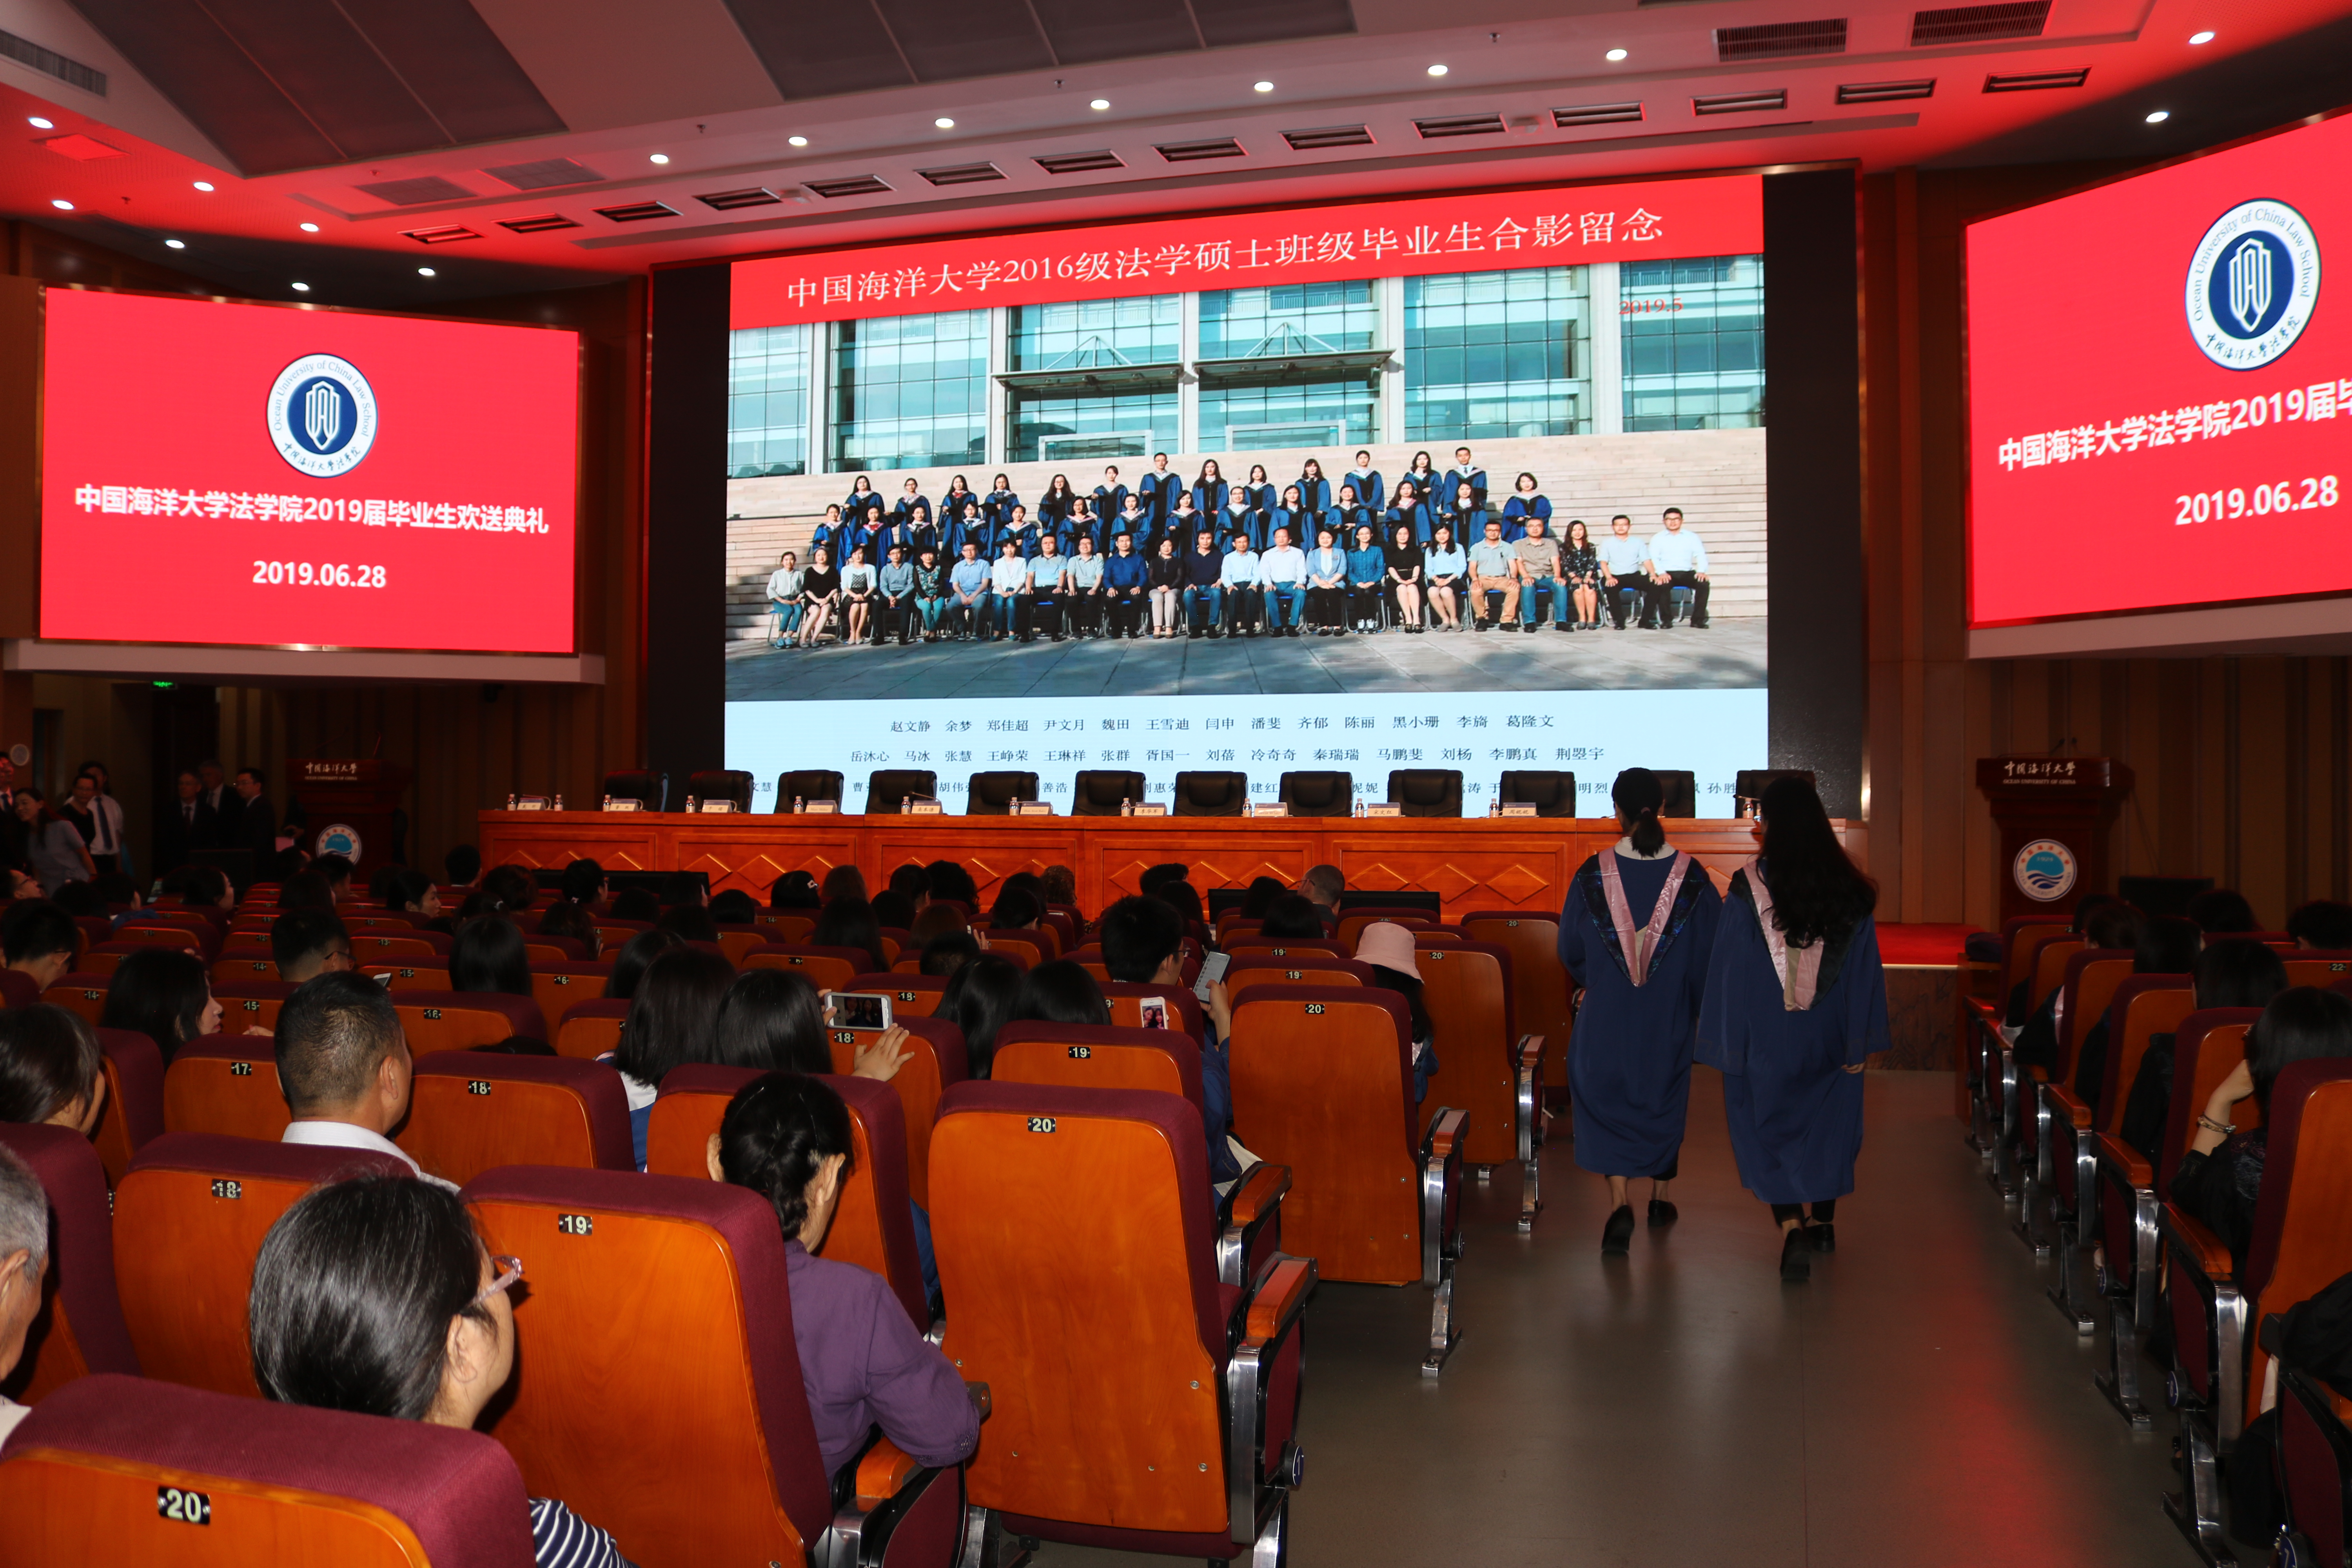 The first four-year micro-campus cohort to graduate from the University of Arizona and a partner university celebrated commencement in late June at Ocean University of China.